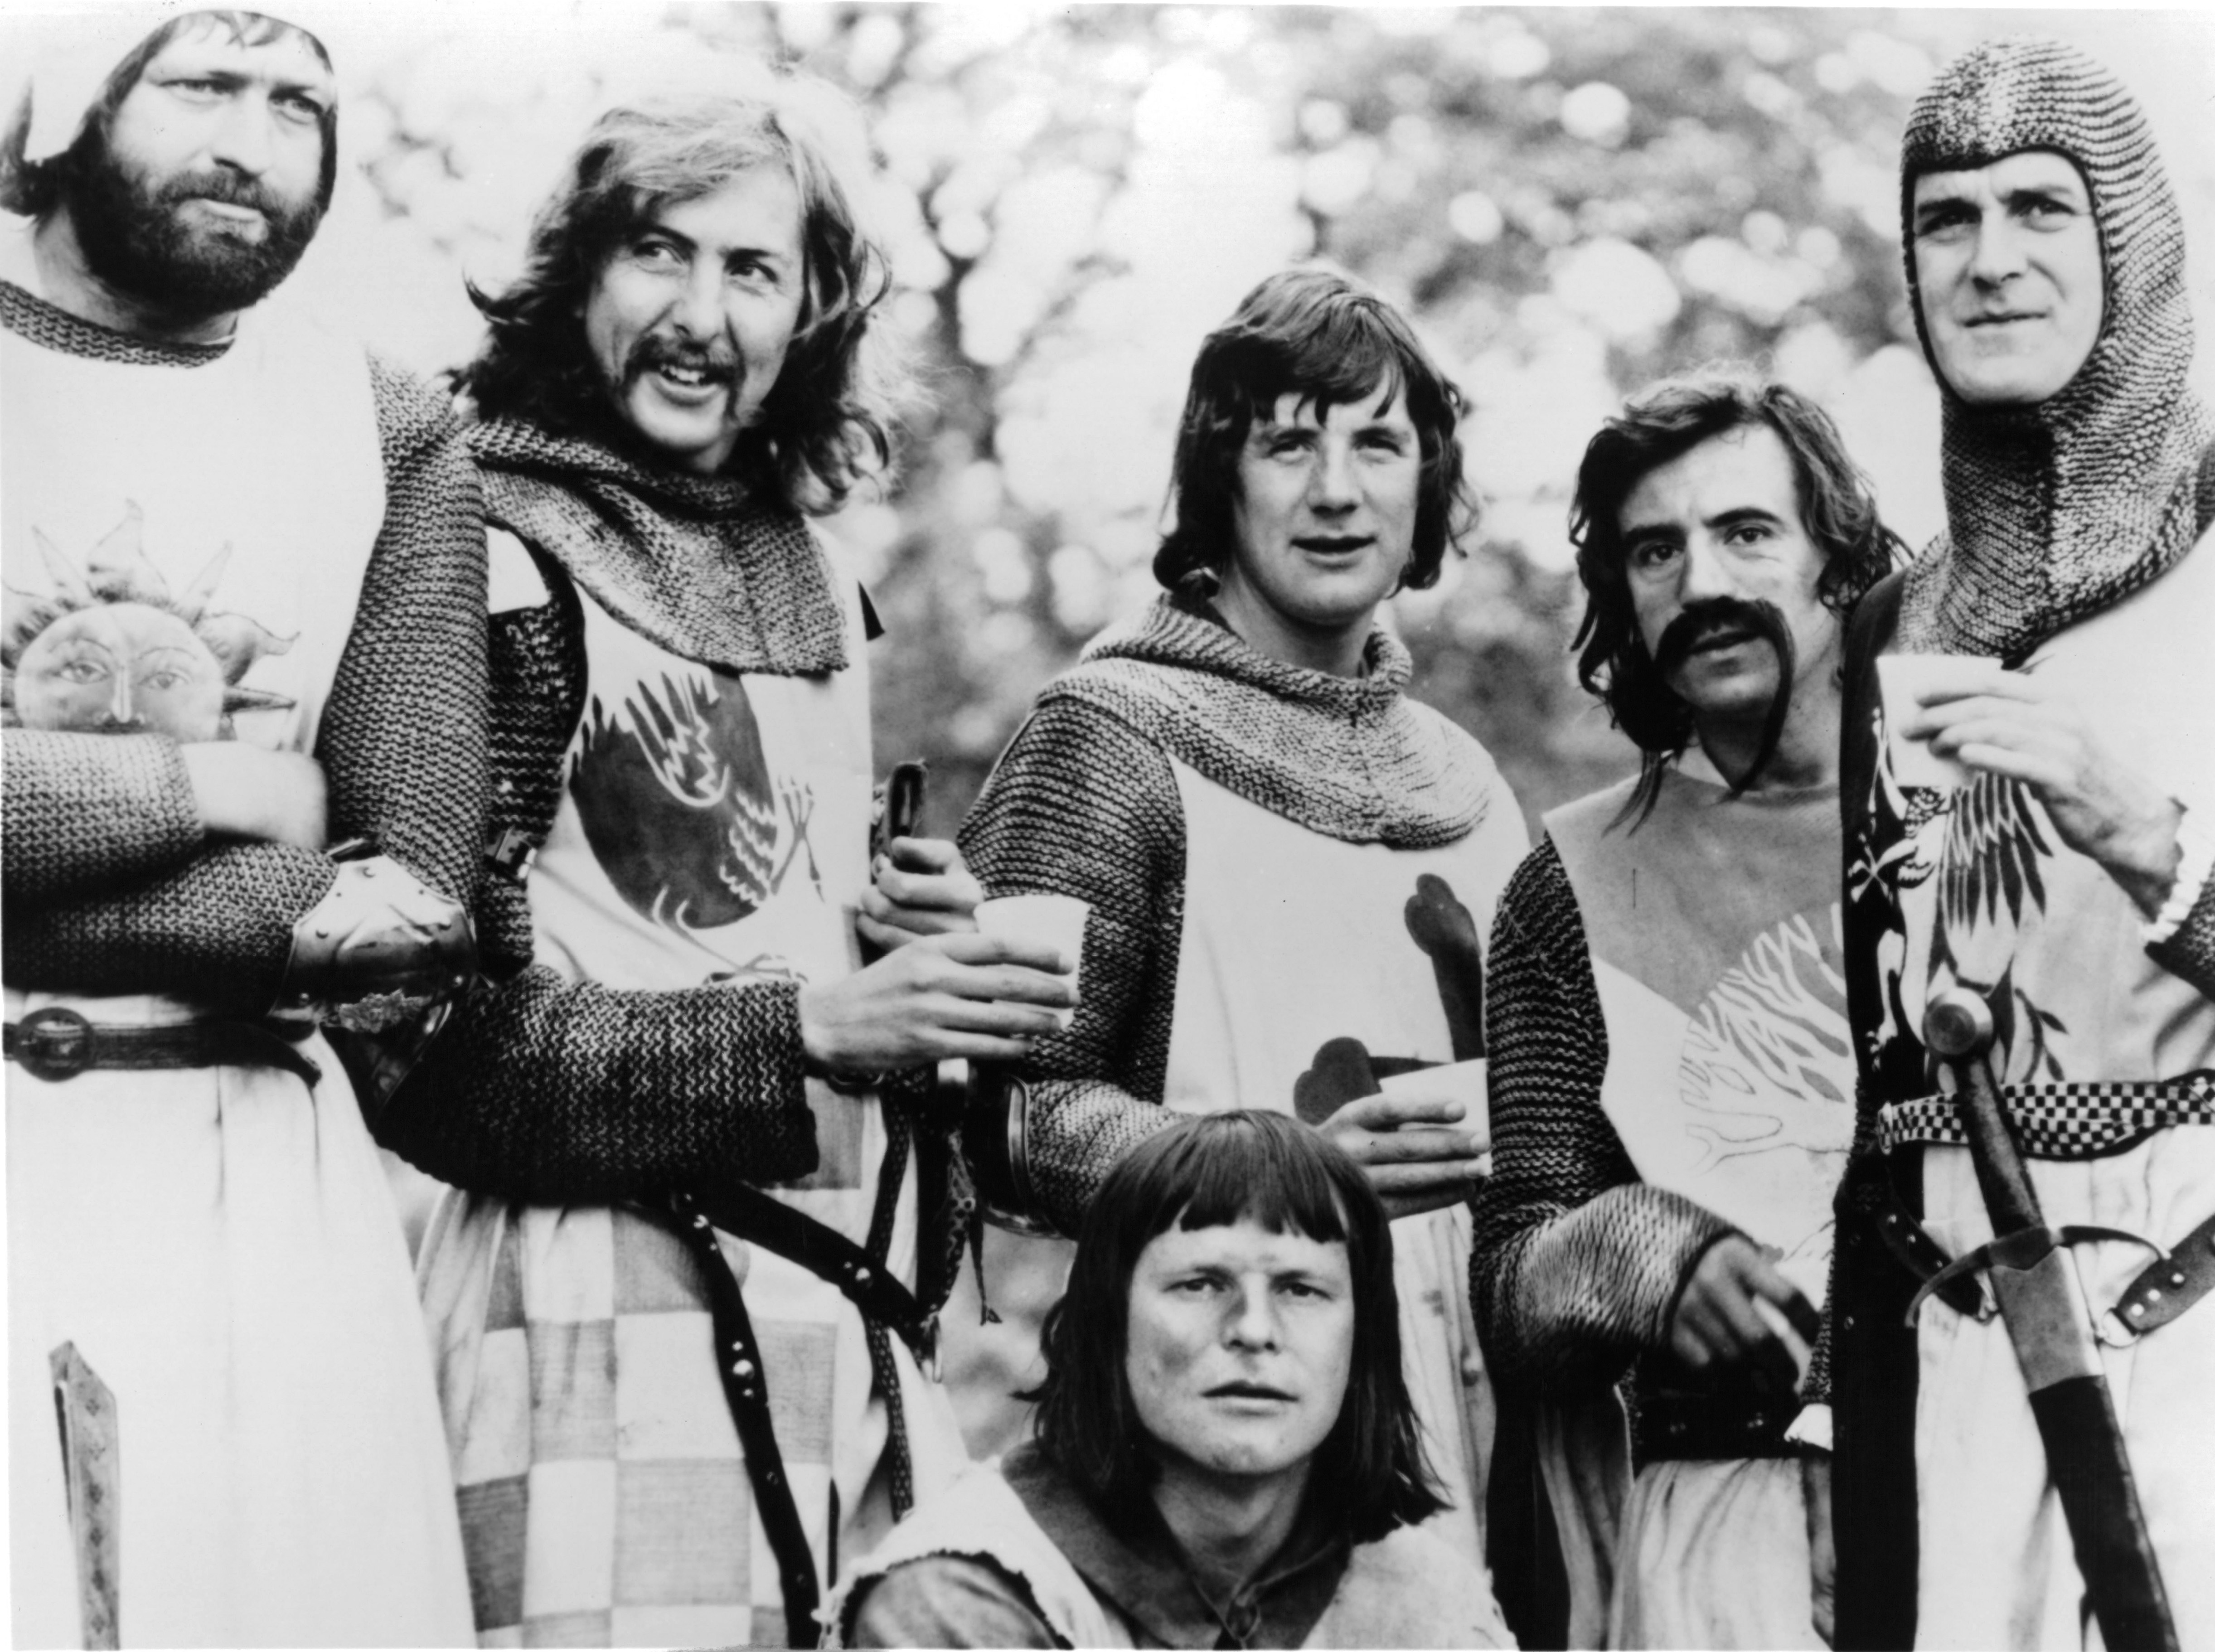 Still of John Cleese, Terry Gilliam, Graham Chapman, Eric Idle, Terry Jones and Michael Palin in Monty Python and the Holy Grail (1975)